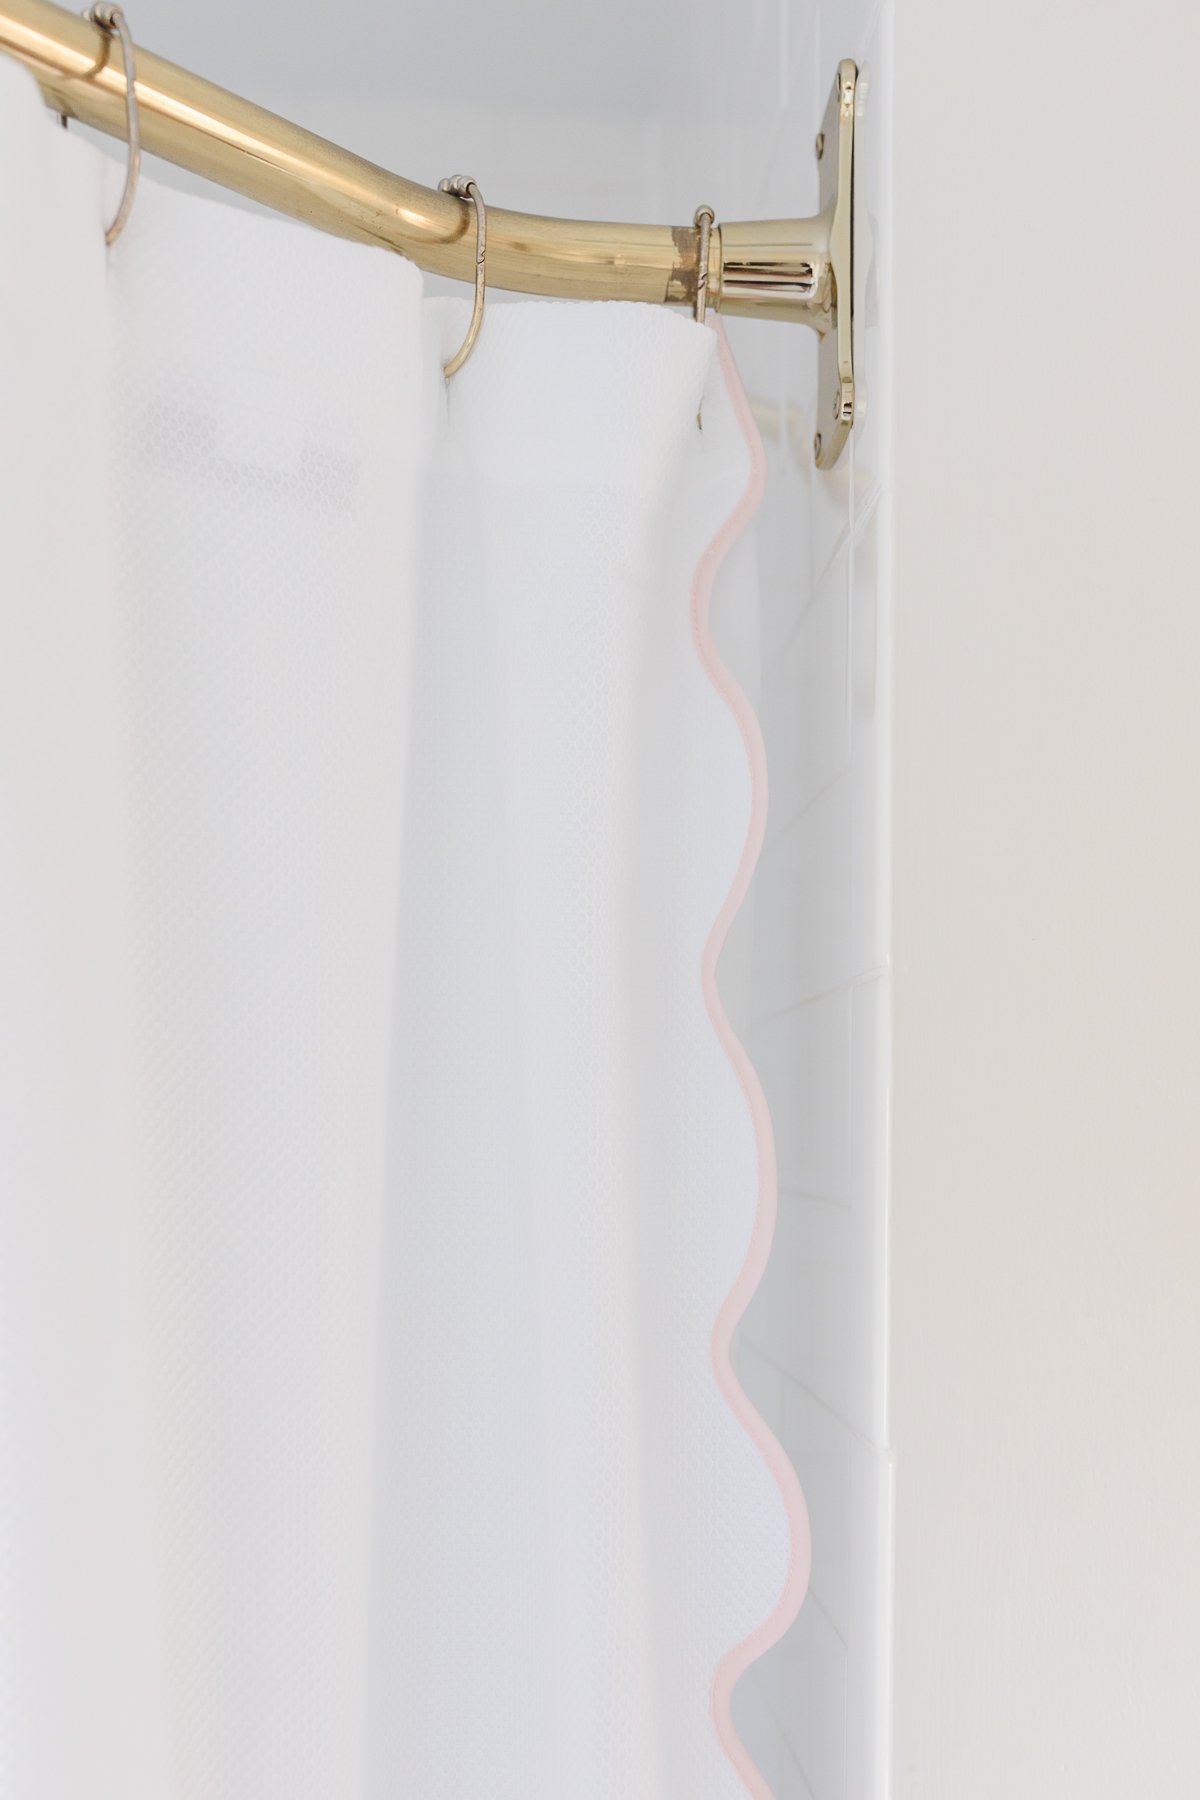 An unlacquered brass shower curtain rod with a white scalloped shower curtain. 